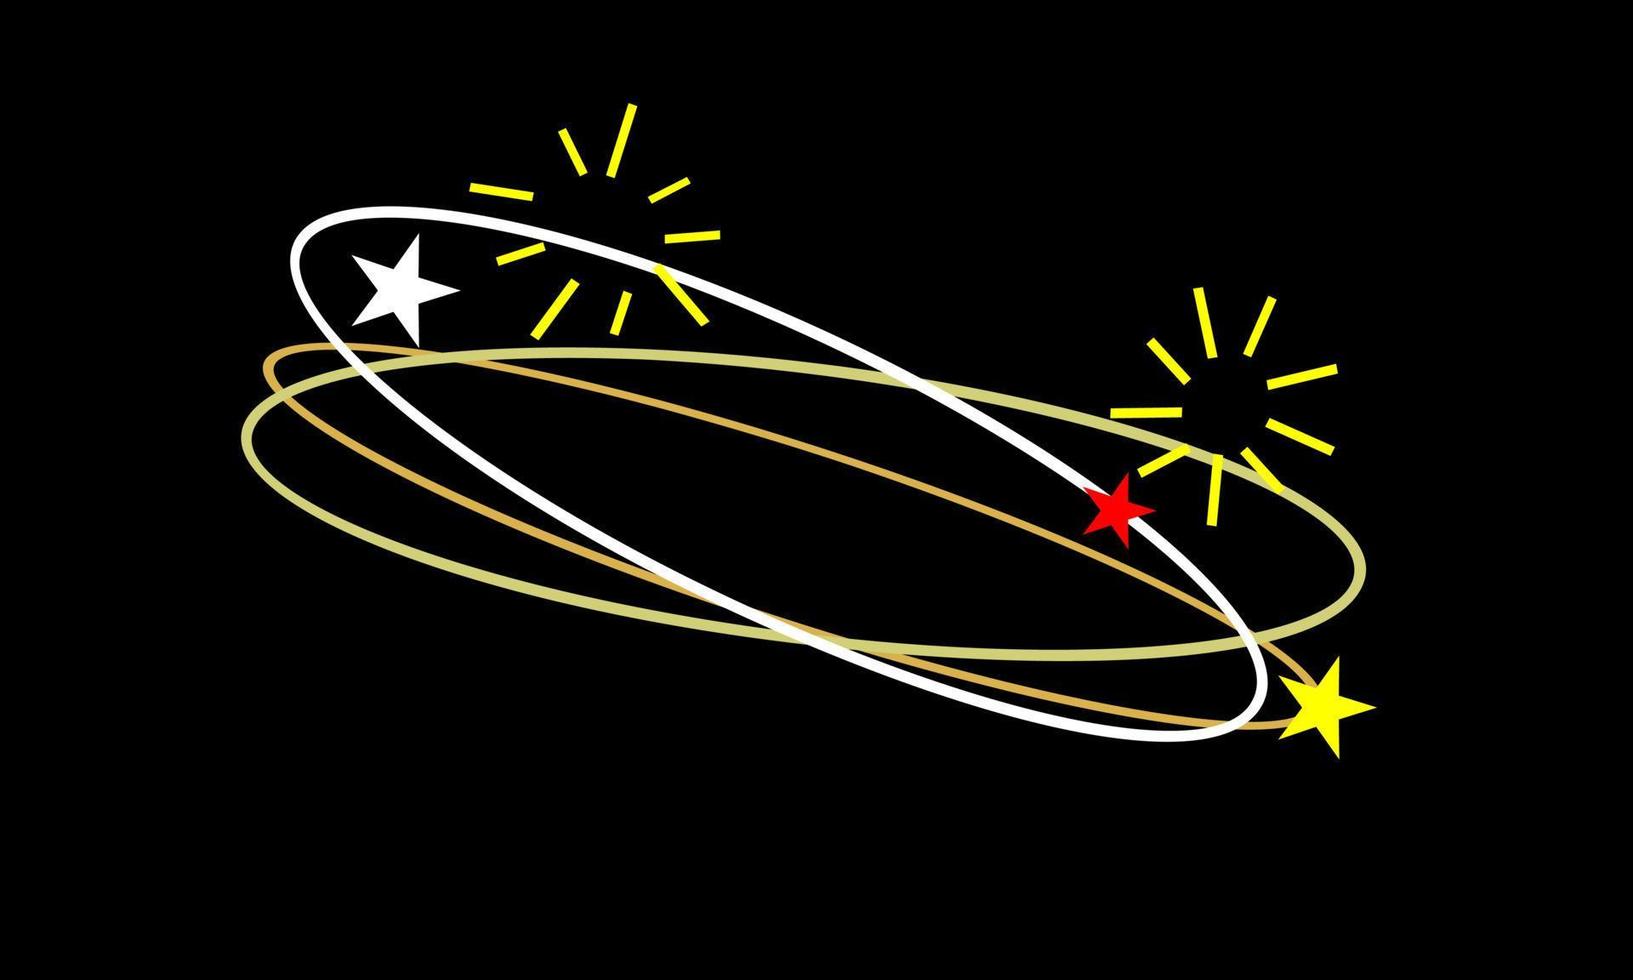 Dizzy expression. Flying stars with orbit traces white,red,yellow color on black background. vector